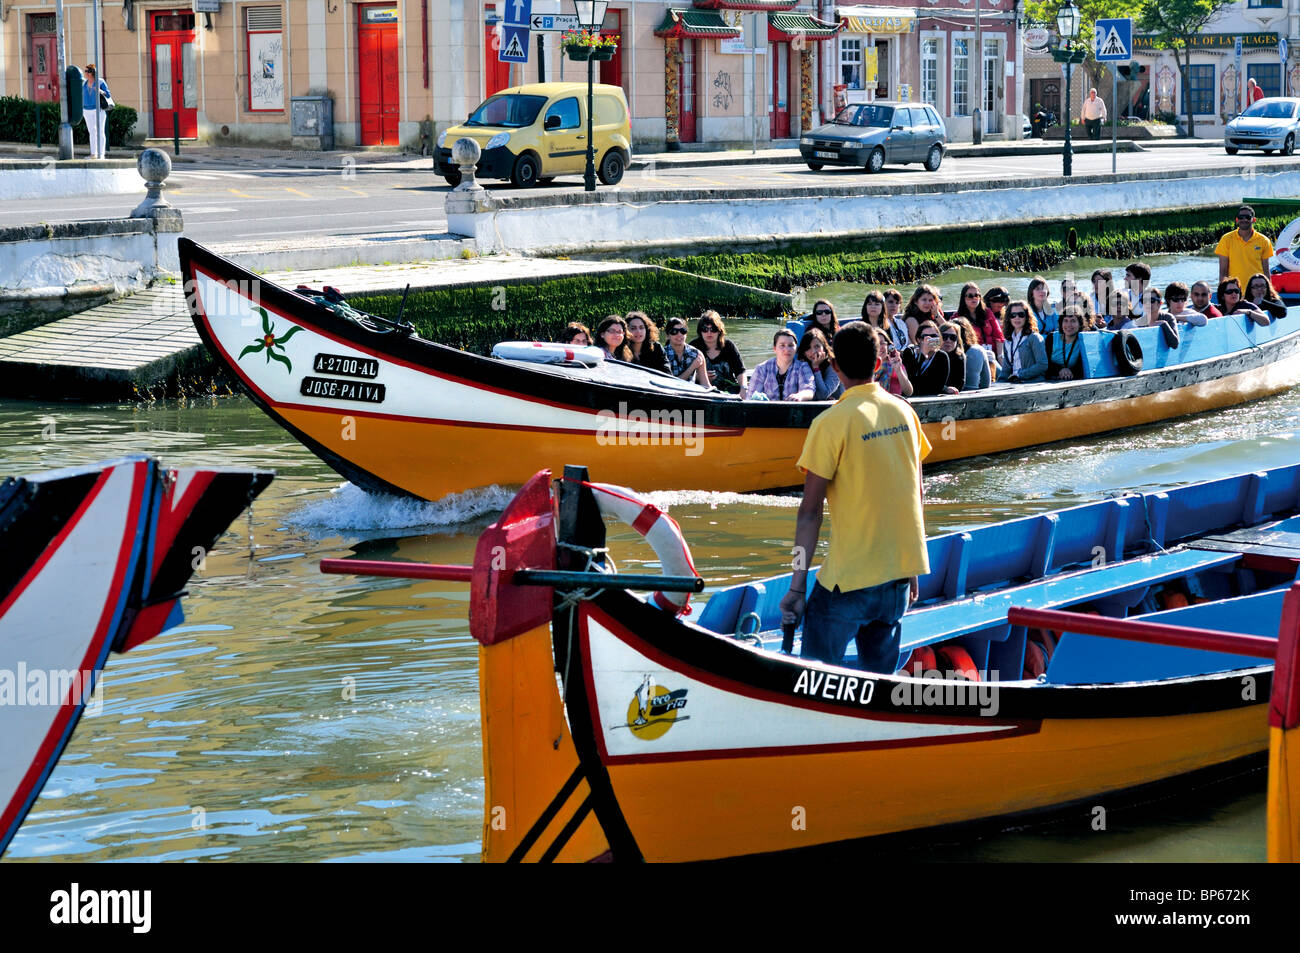 Portugal: Touristic excursions with traditional 'Moliceiro' boats in Aveiro Stock Photo